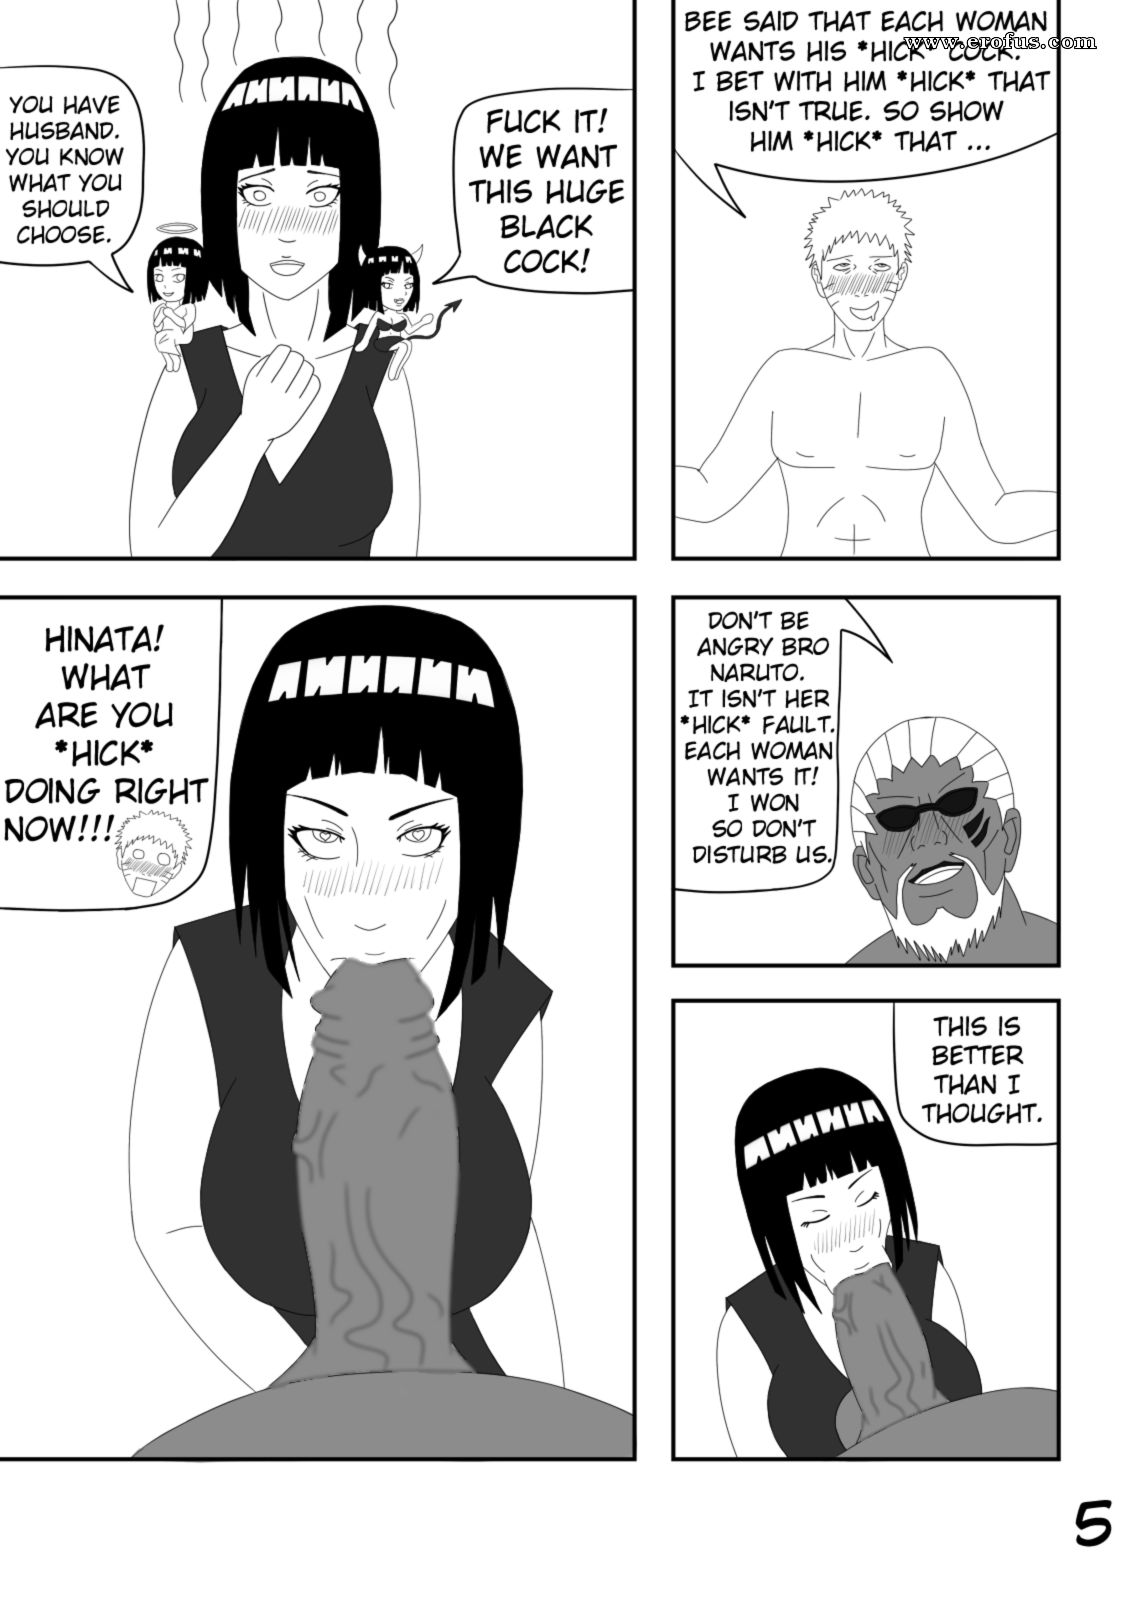 Page 6 hinata-hime-comics/bee-pollinating-a-flower Erofus